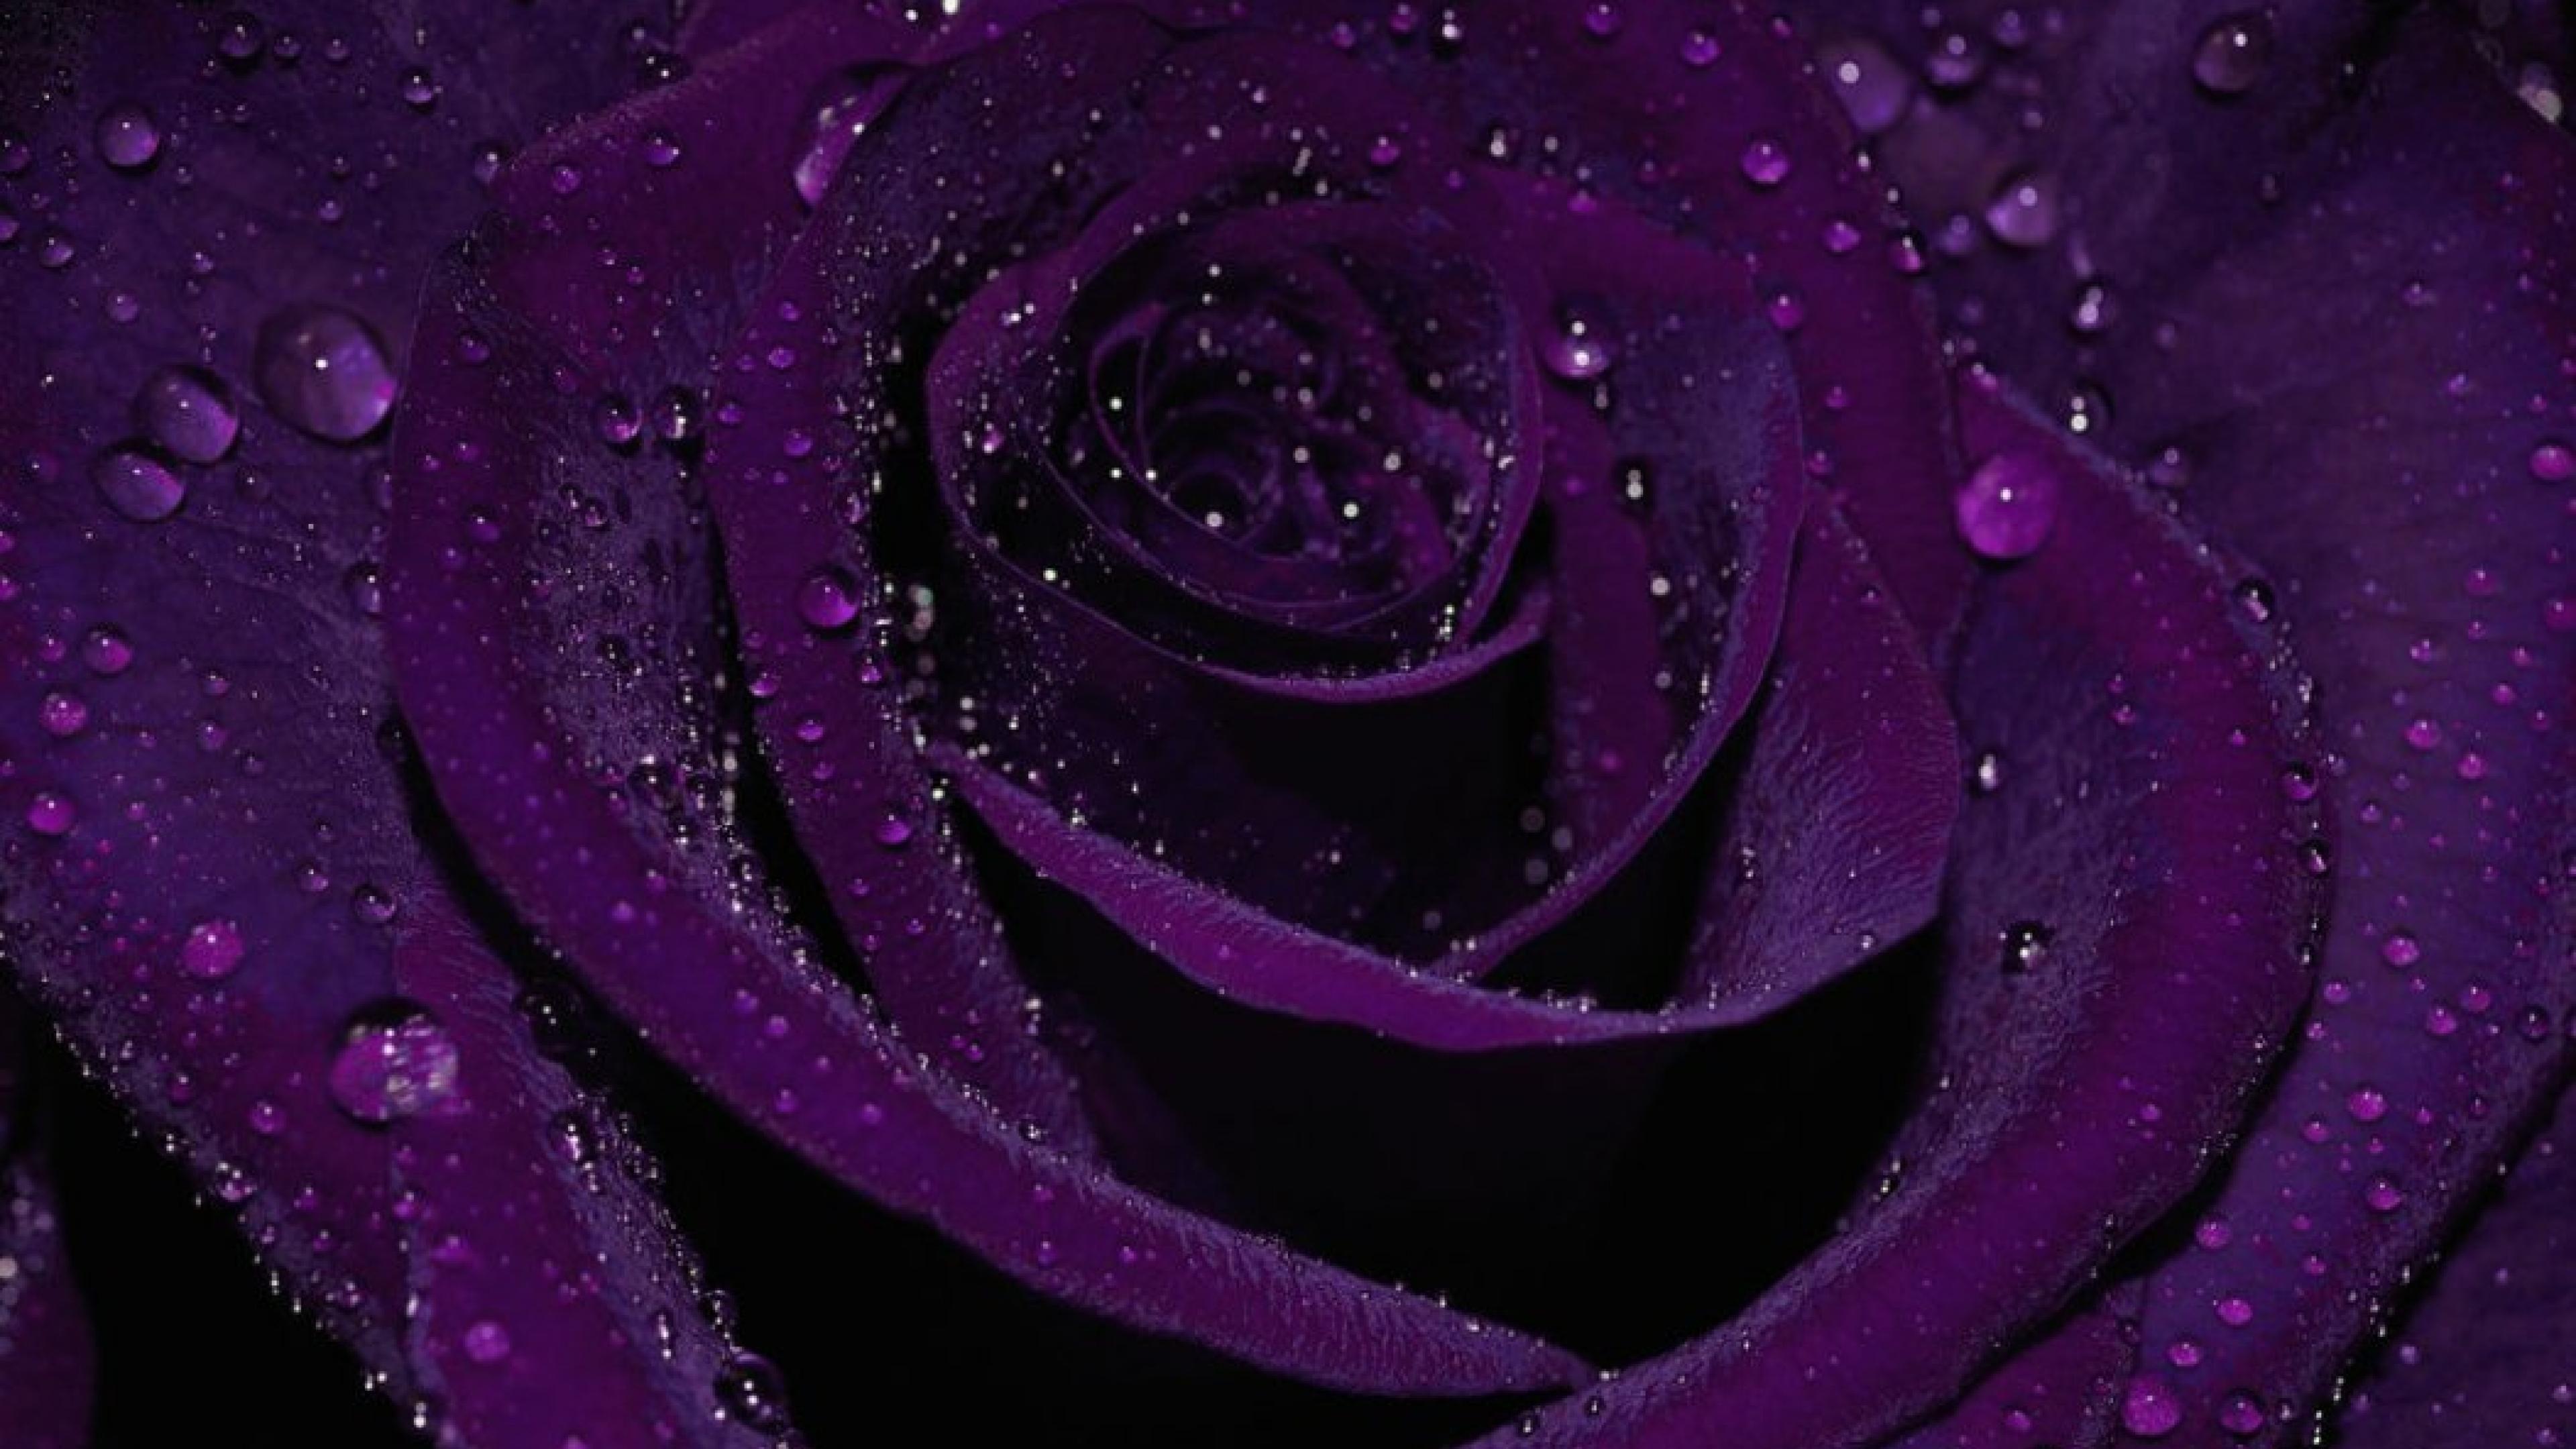 Aesthetic Backgrounds Black And Purple - Largest Wallpaper Portal